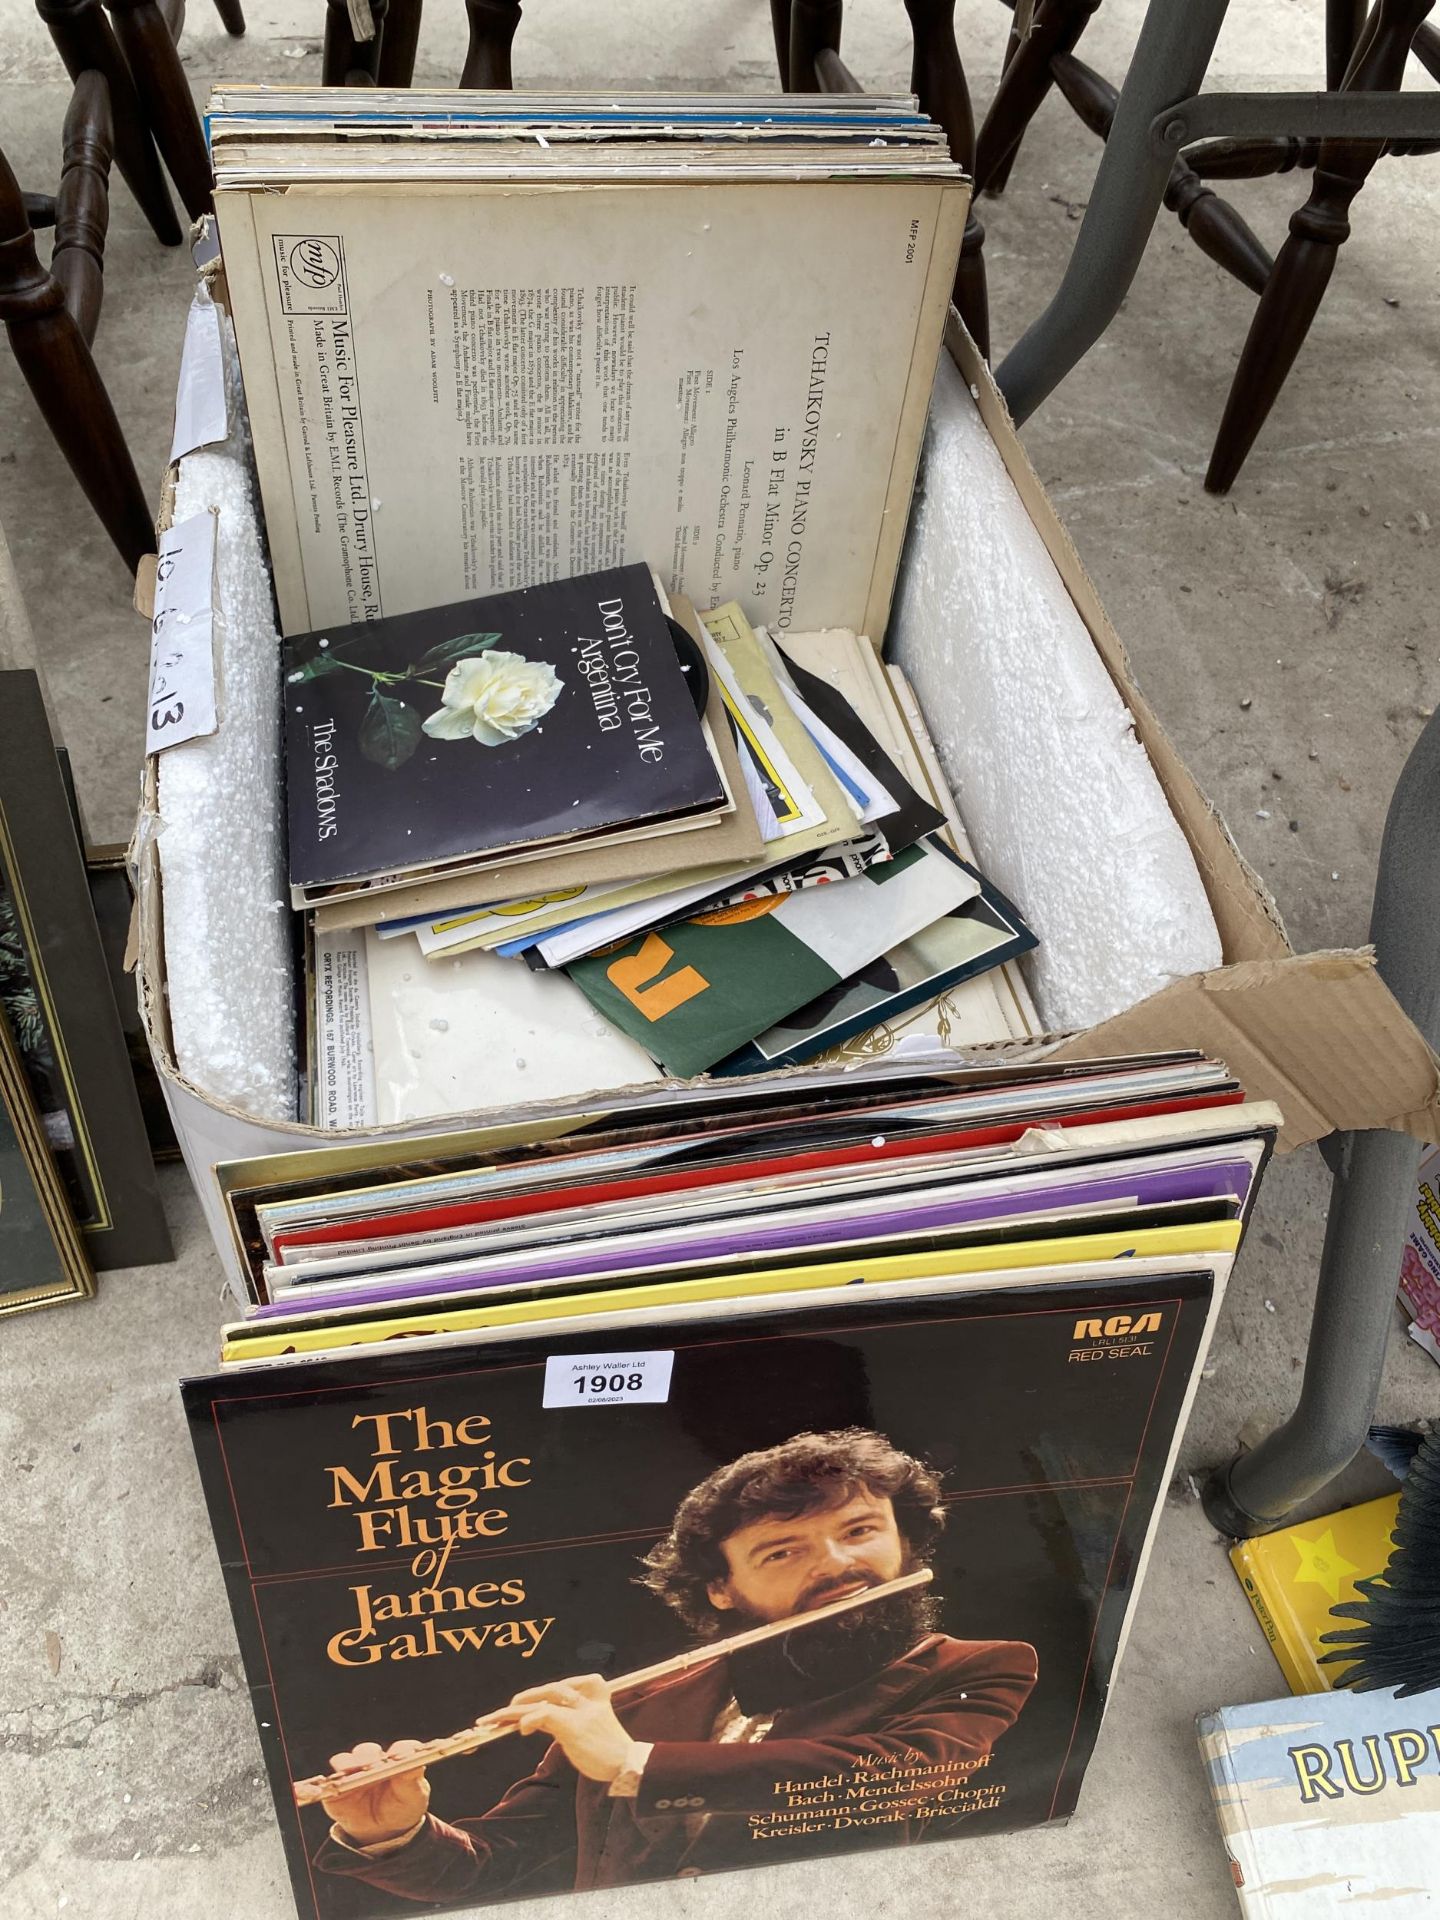 AN ASSORTMENT OF LP RECORDS AND 7" SINGLES